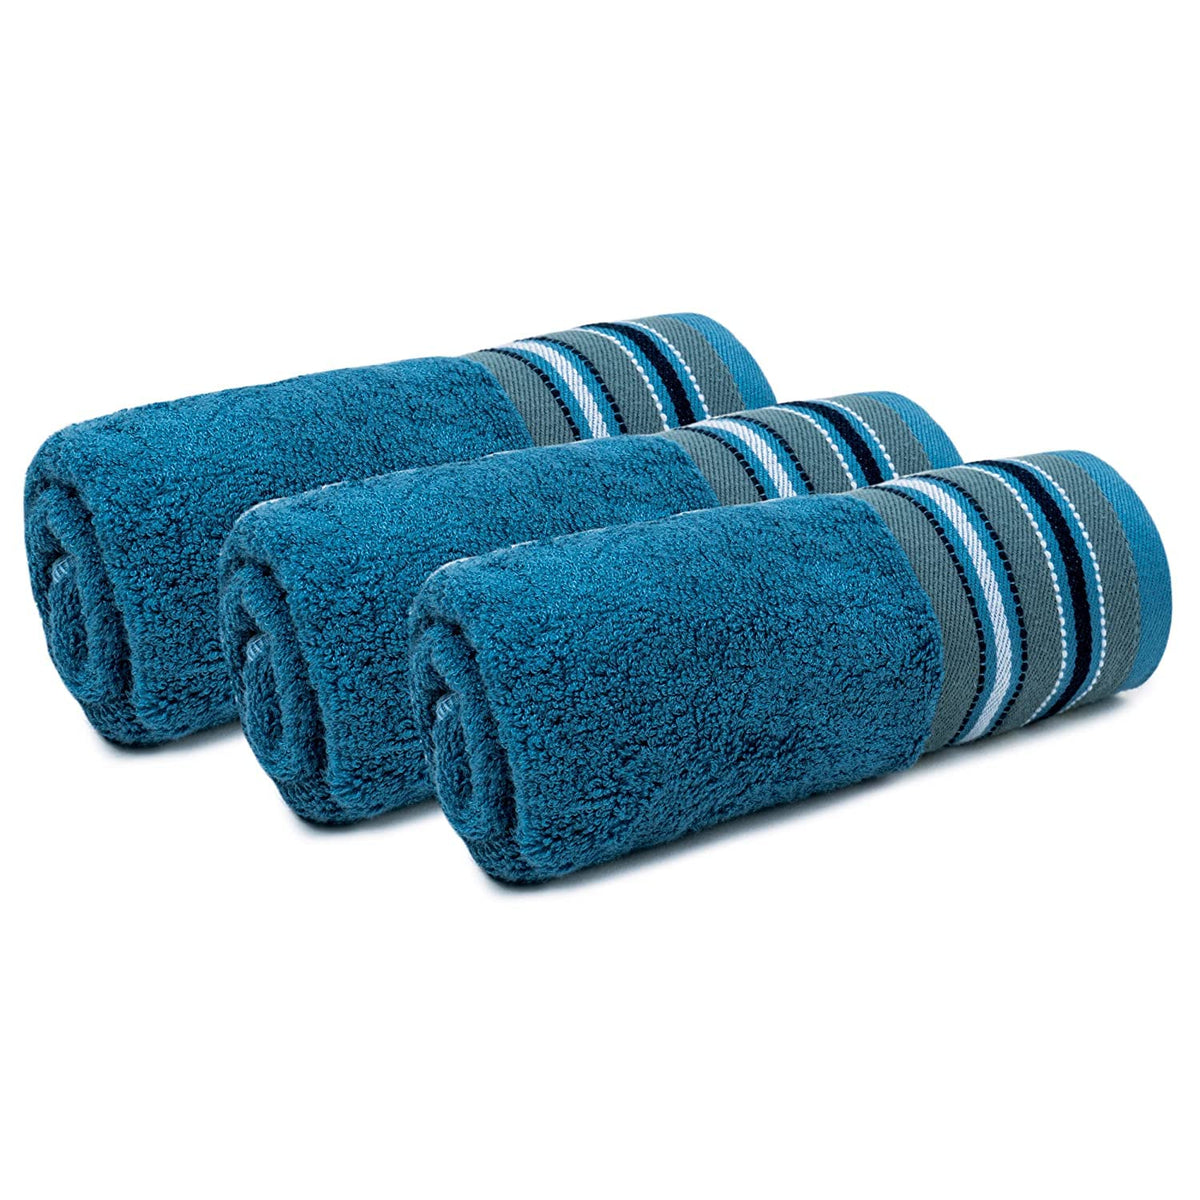 Mush Designer Bamboo Face Towel |Ultra Soft, Absorbent & Quick Dry Towel for Bath, Beach, Pool, Travel, Spa and Yoga (Emerald Blue, Face Towel, Set of 3)